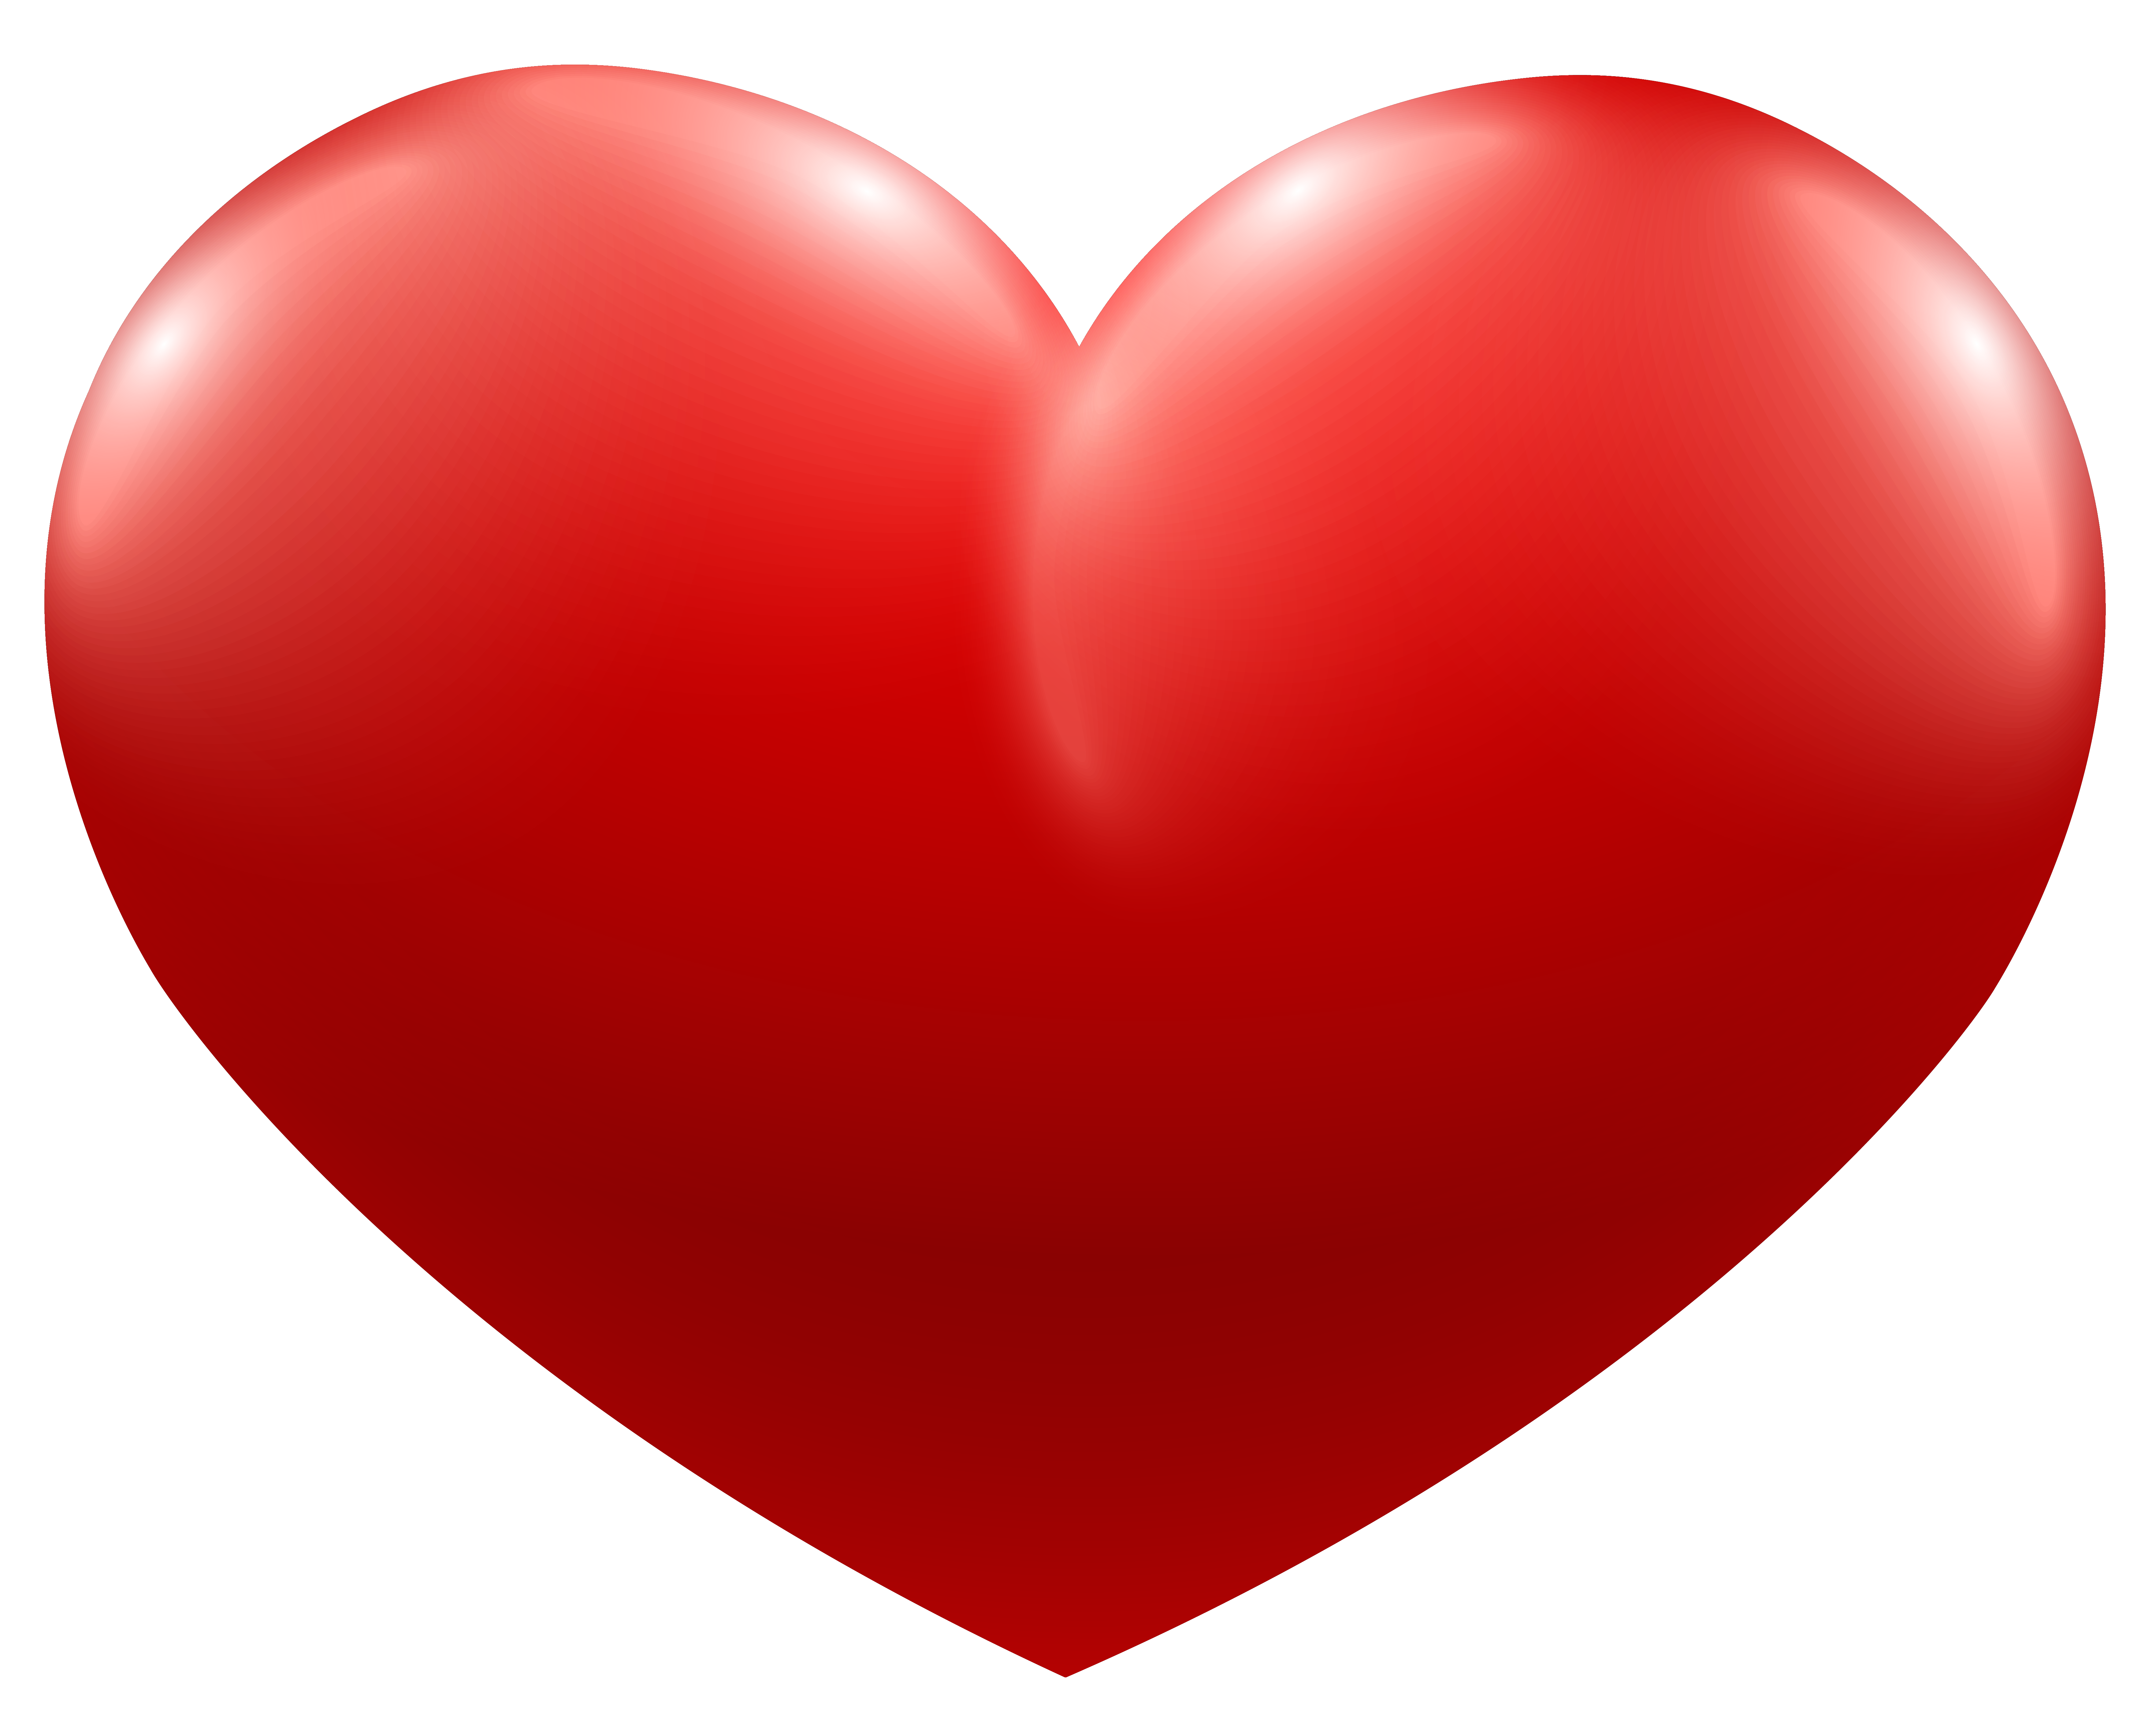 Red Heart PNG Image.